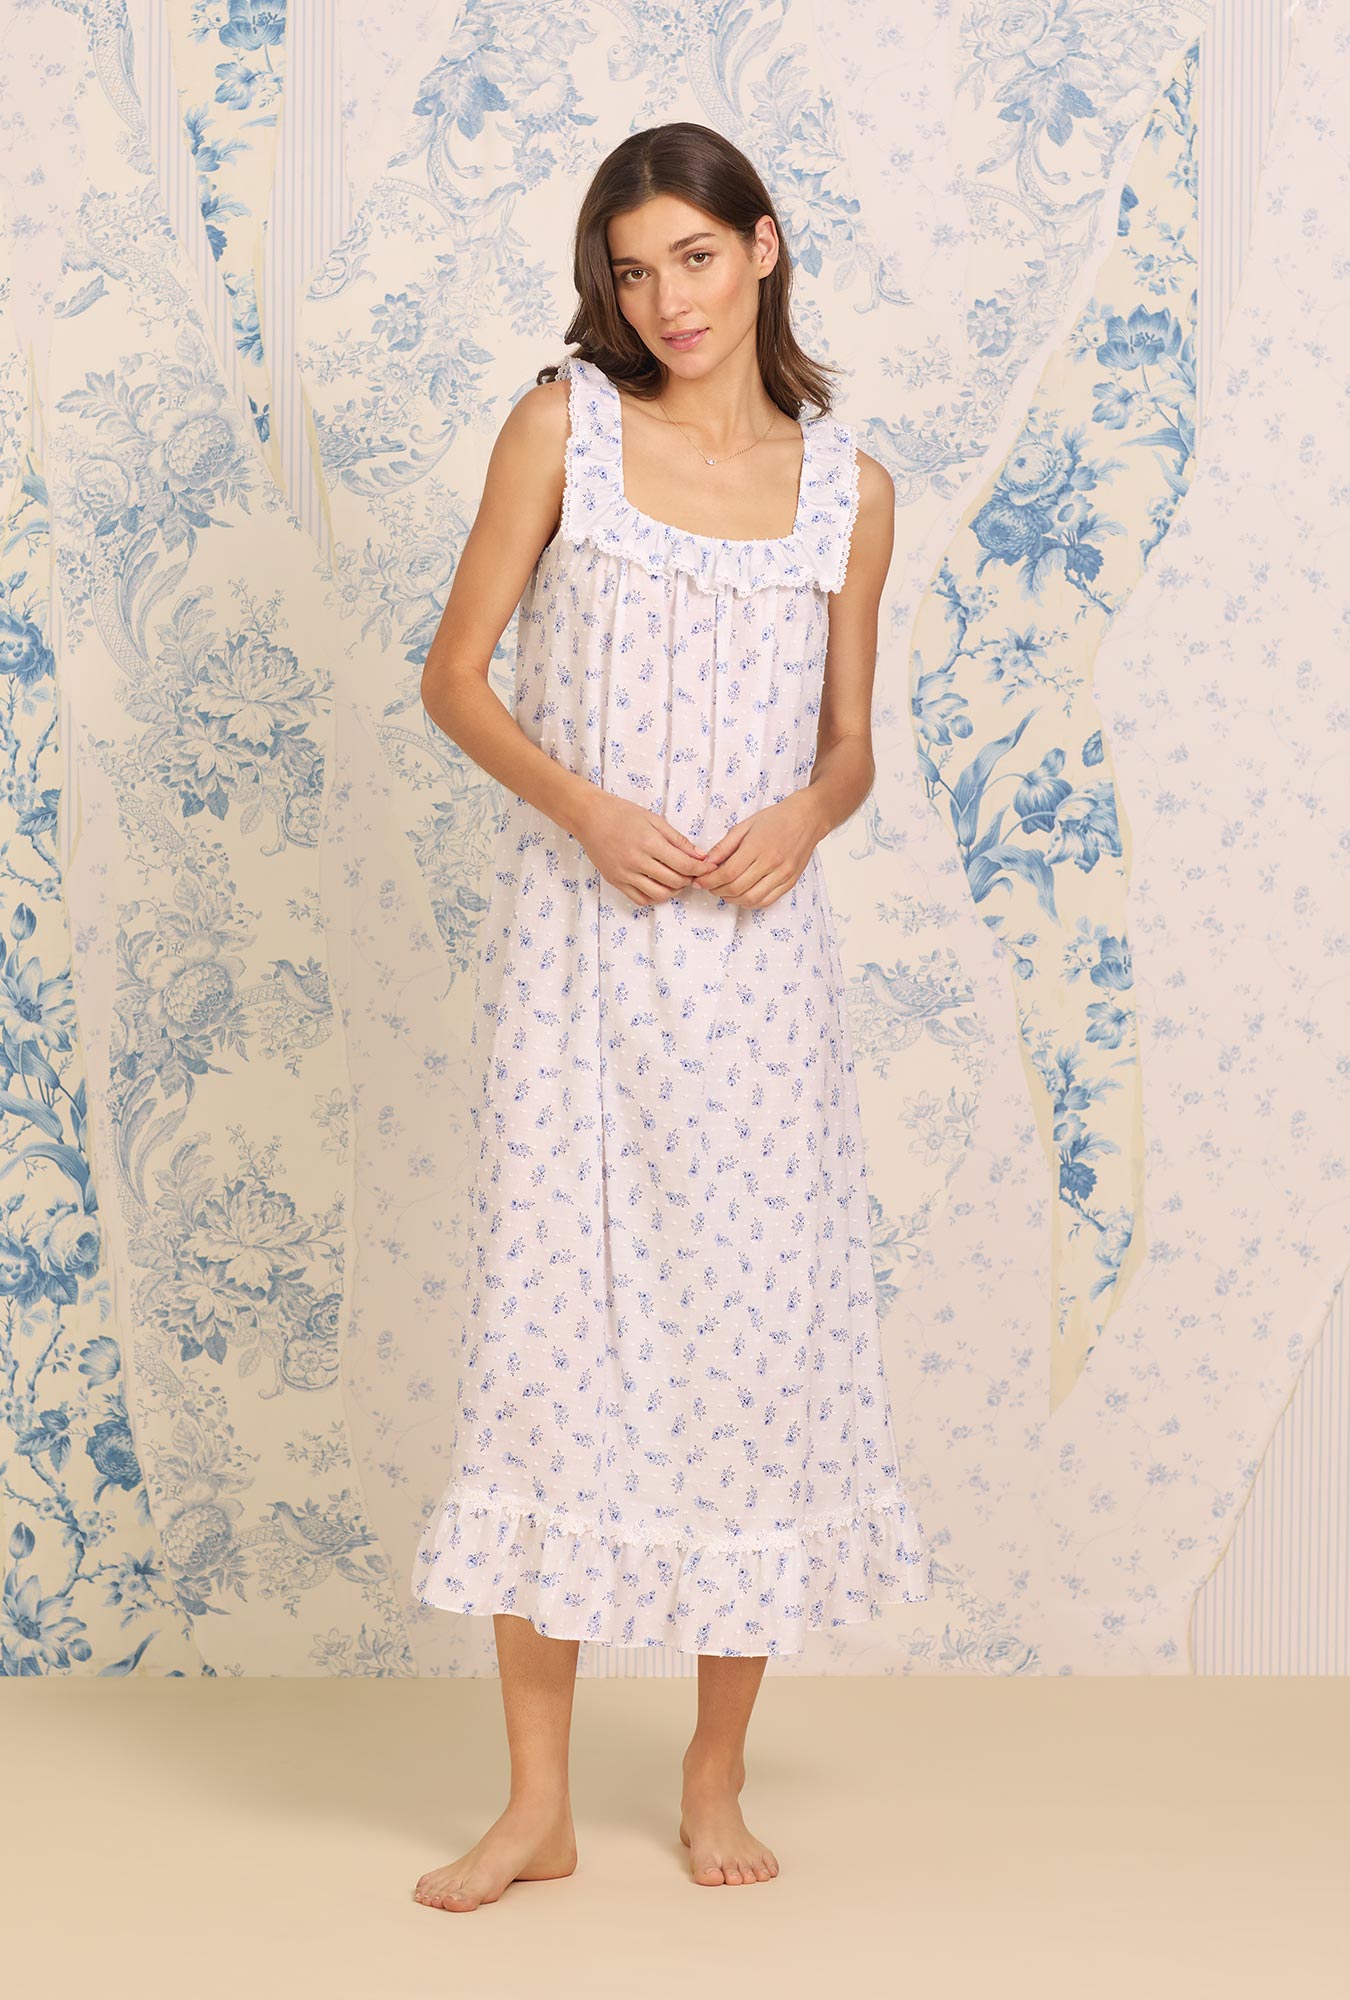 A lady wearing white sleeveless Navy Floral Cotton Ruffle Nightgown with Swiss Dot print